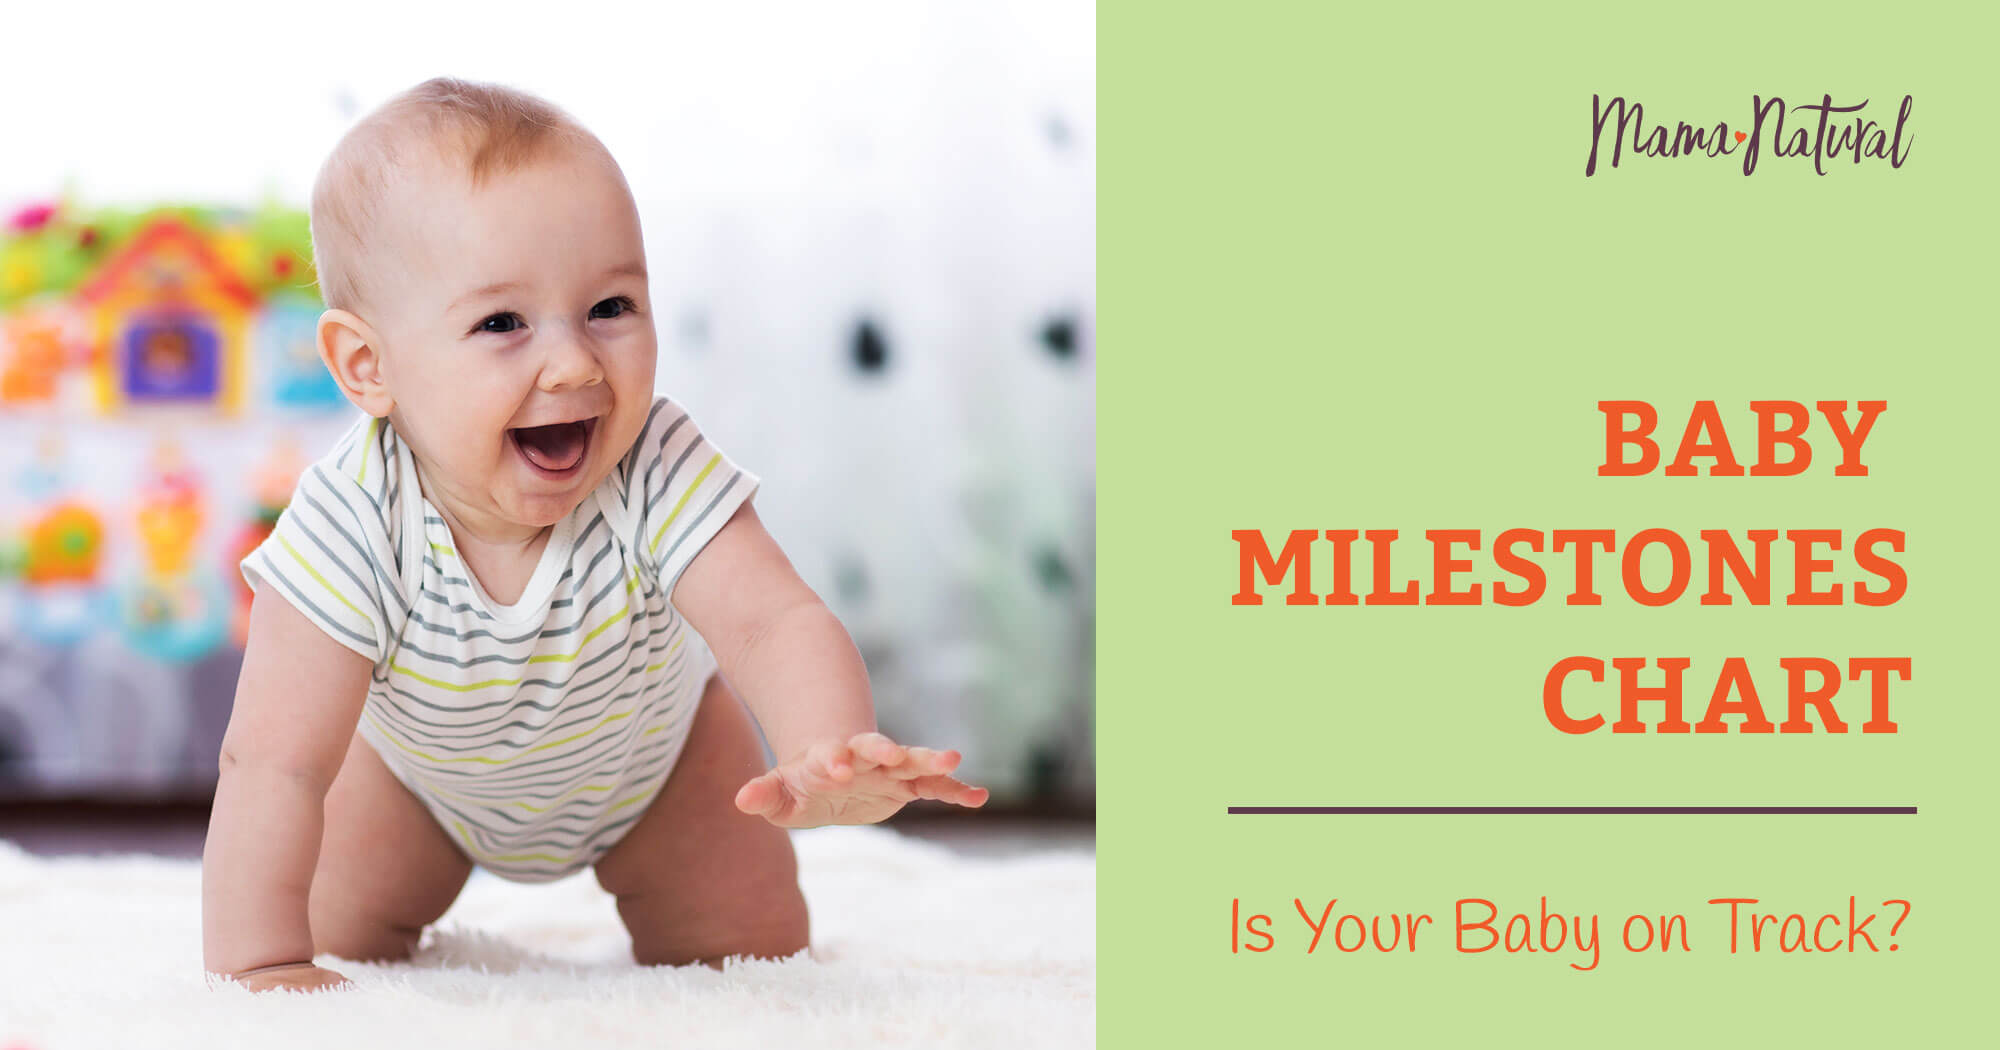 Baby Milestones Chart: Is Your Baby on Track? - Mama Natural